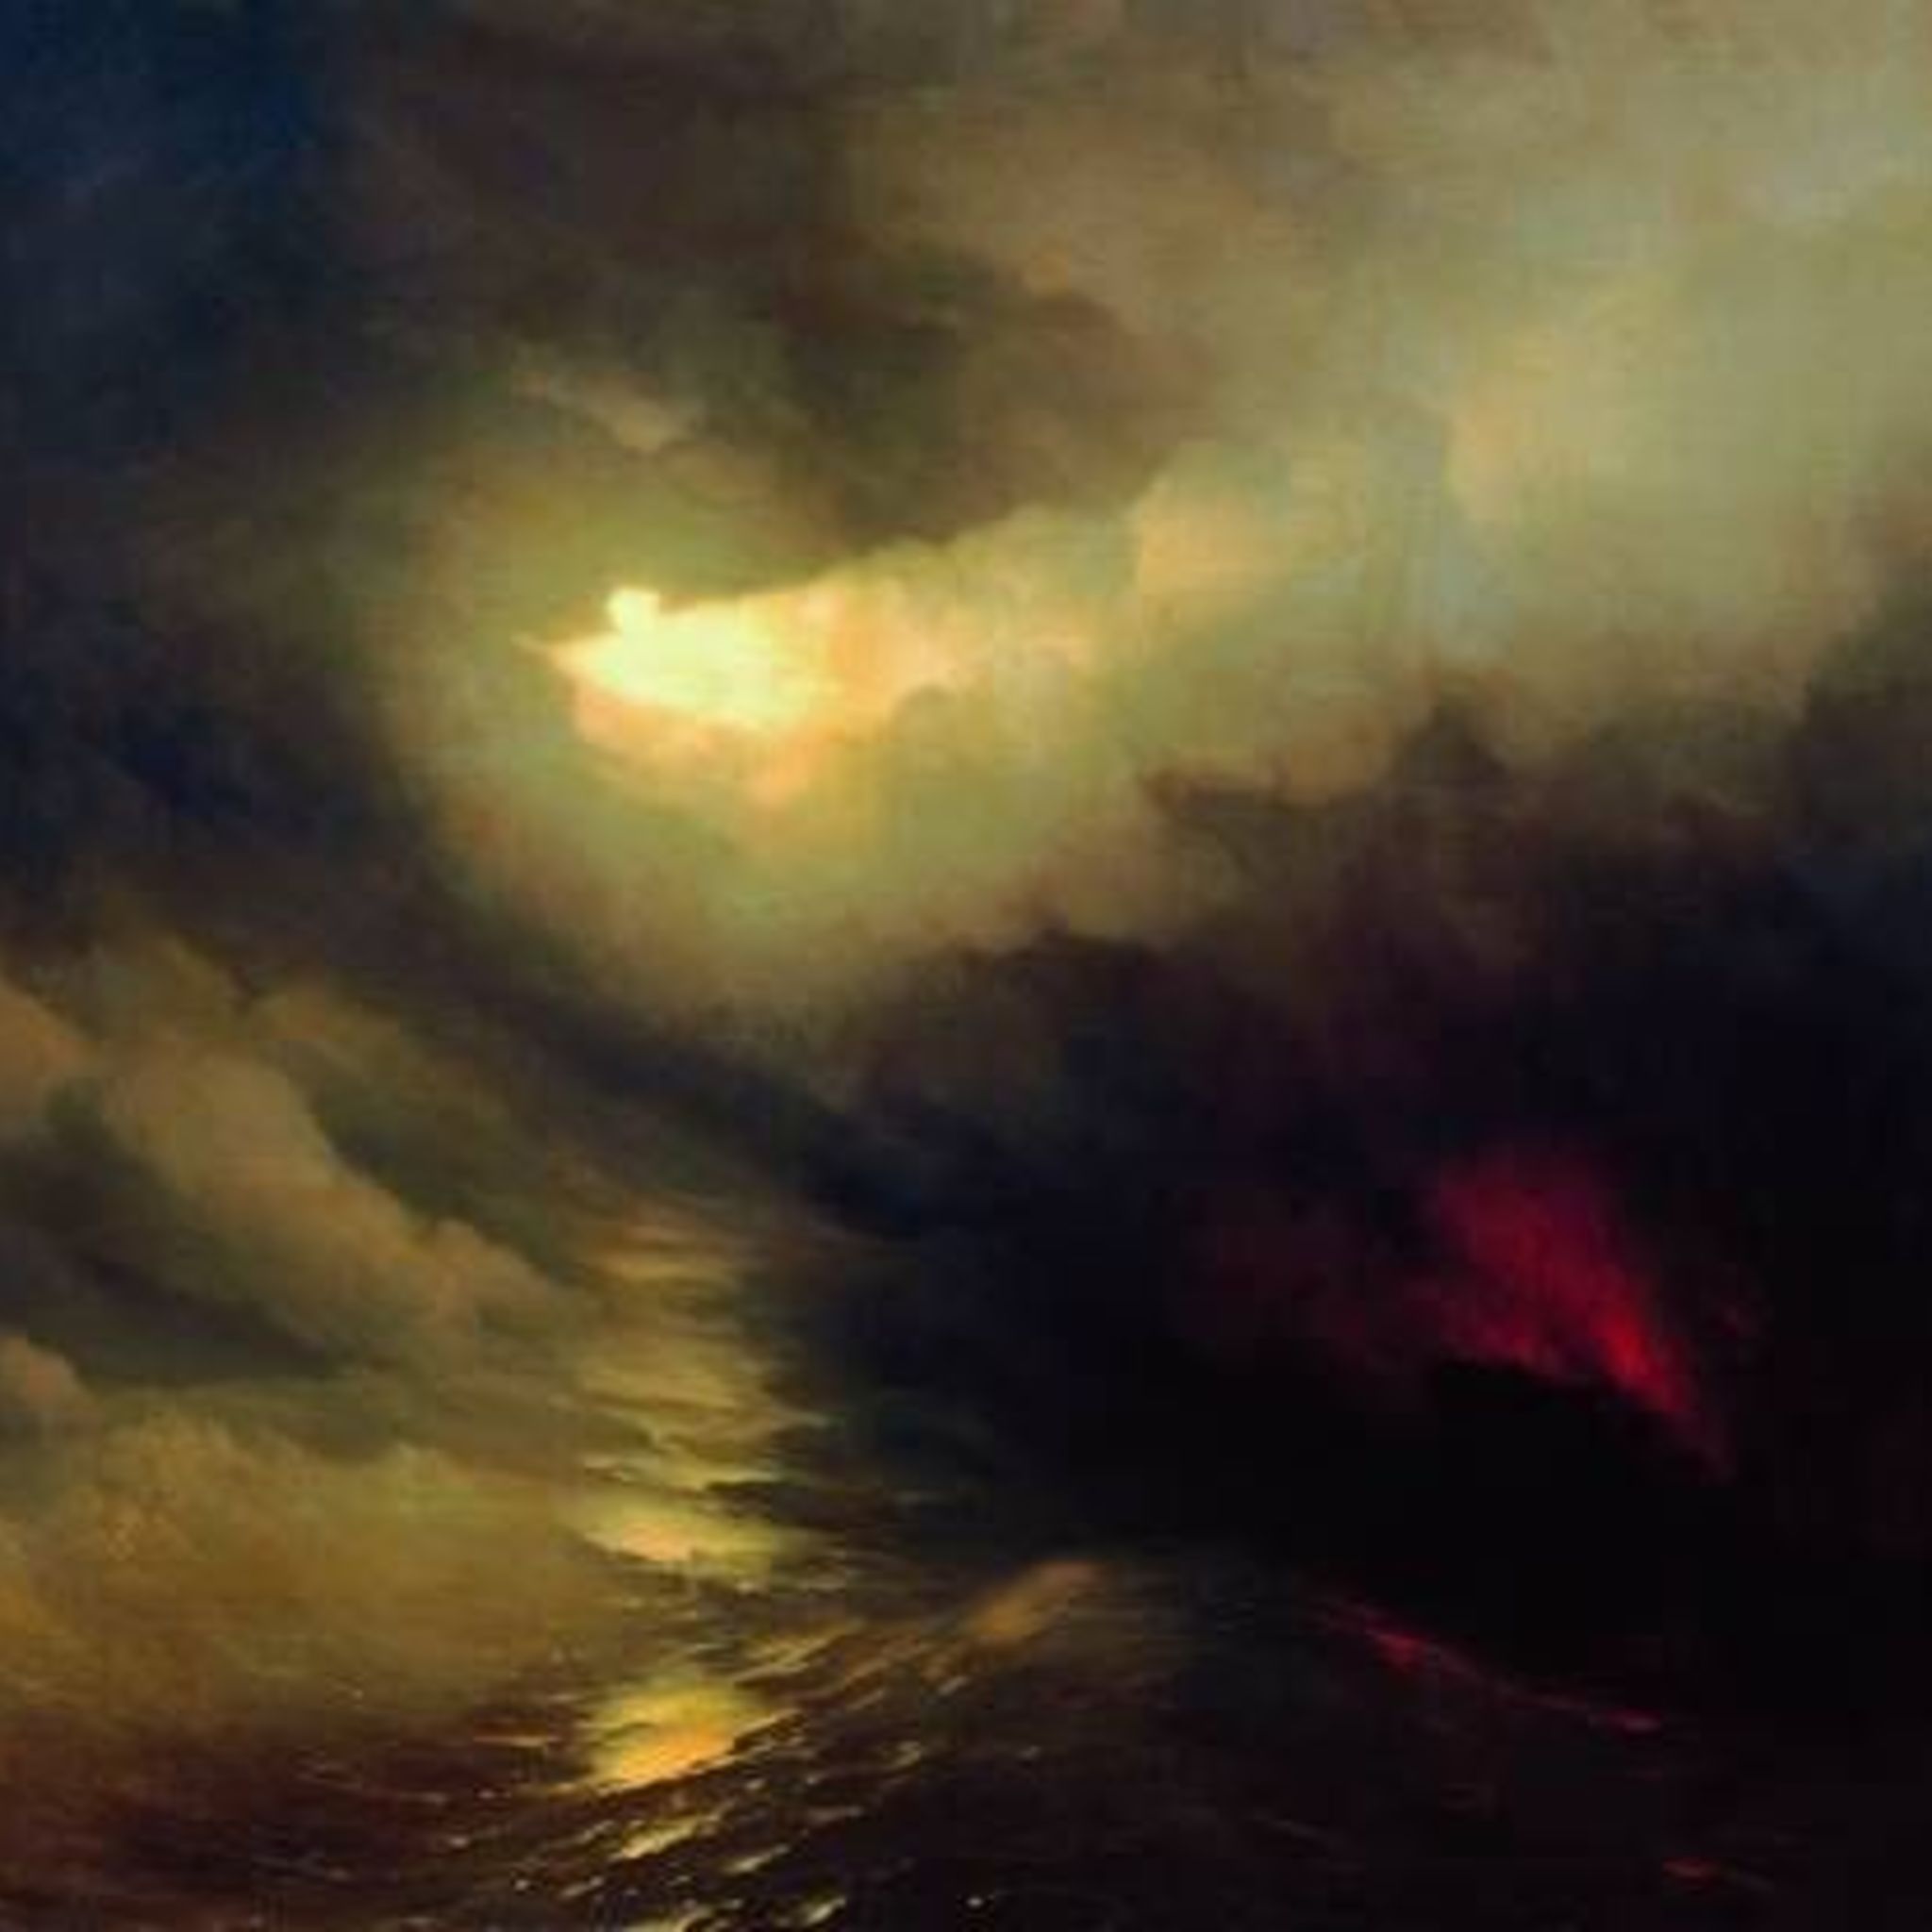 Igor Baskin and D-sound project on Aivazovsky exhibition